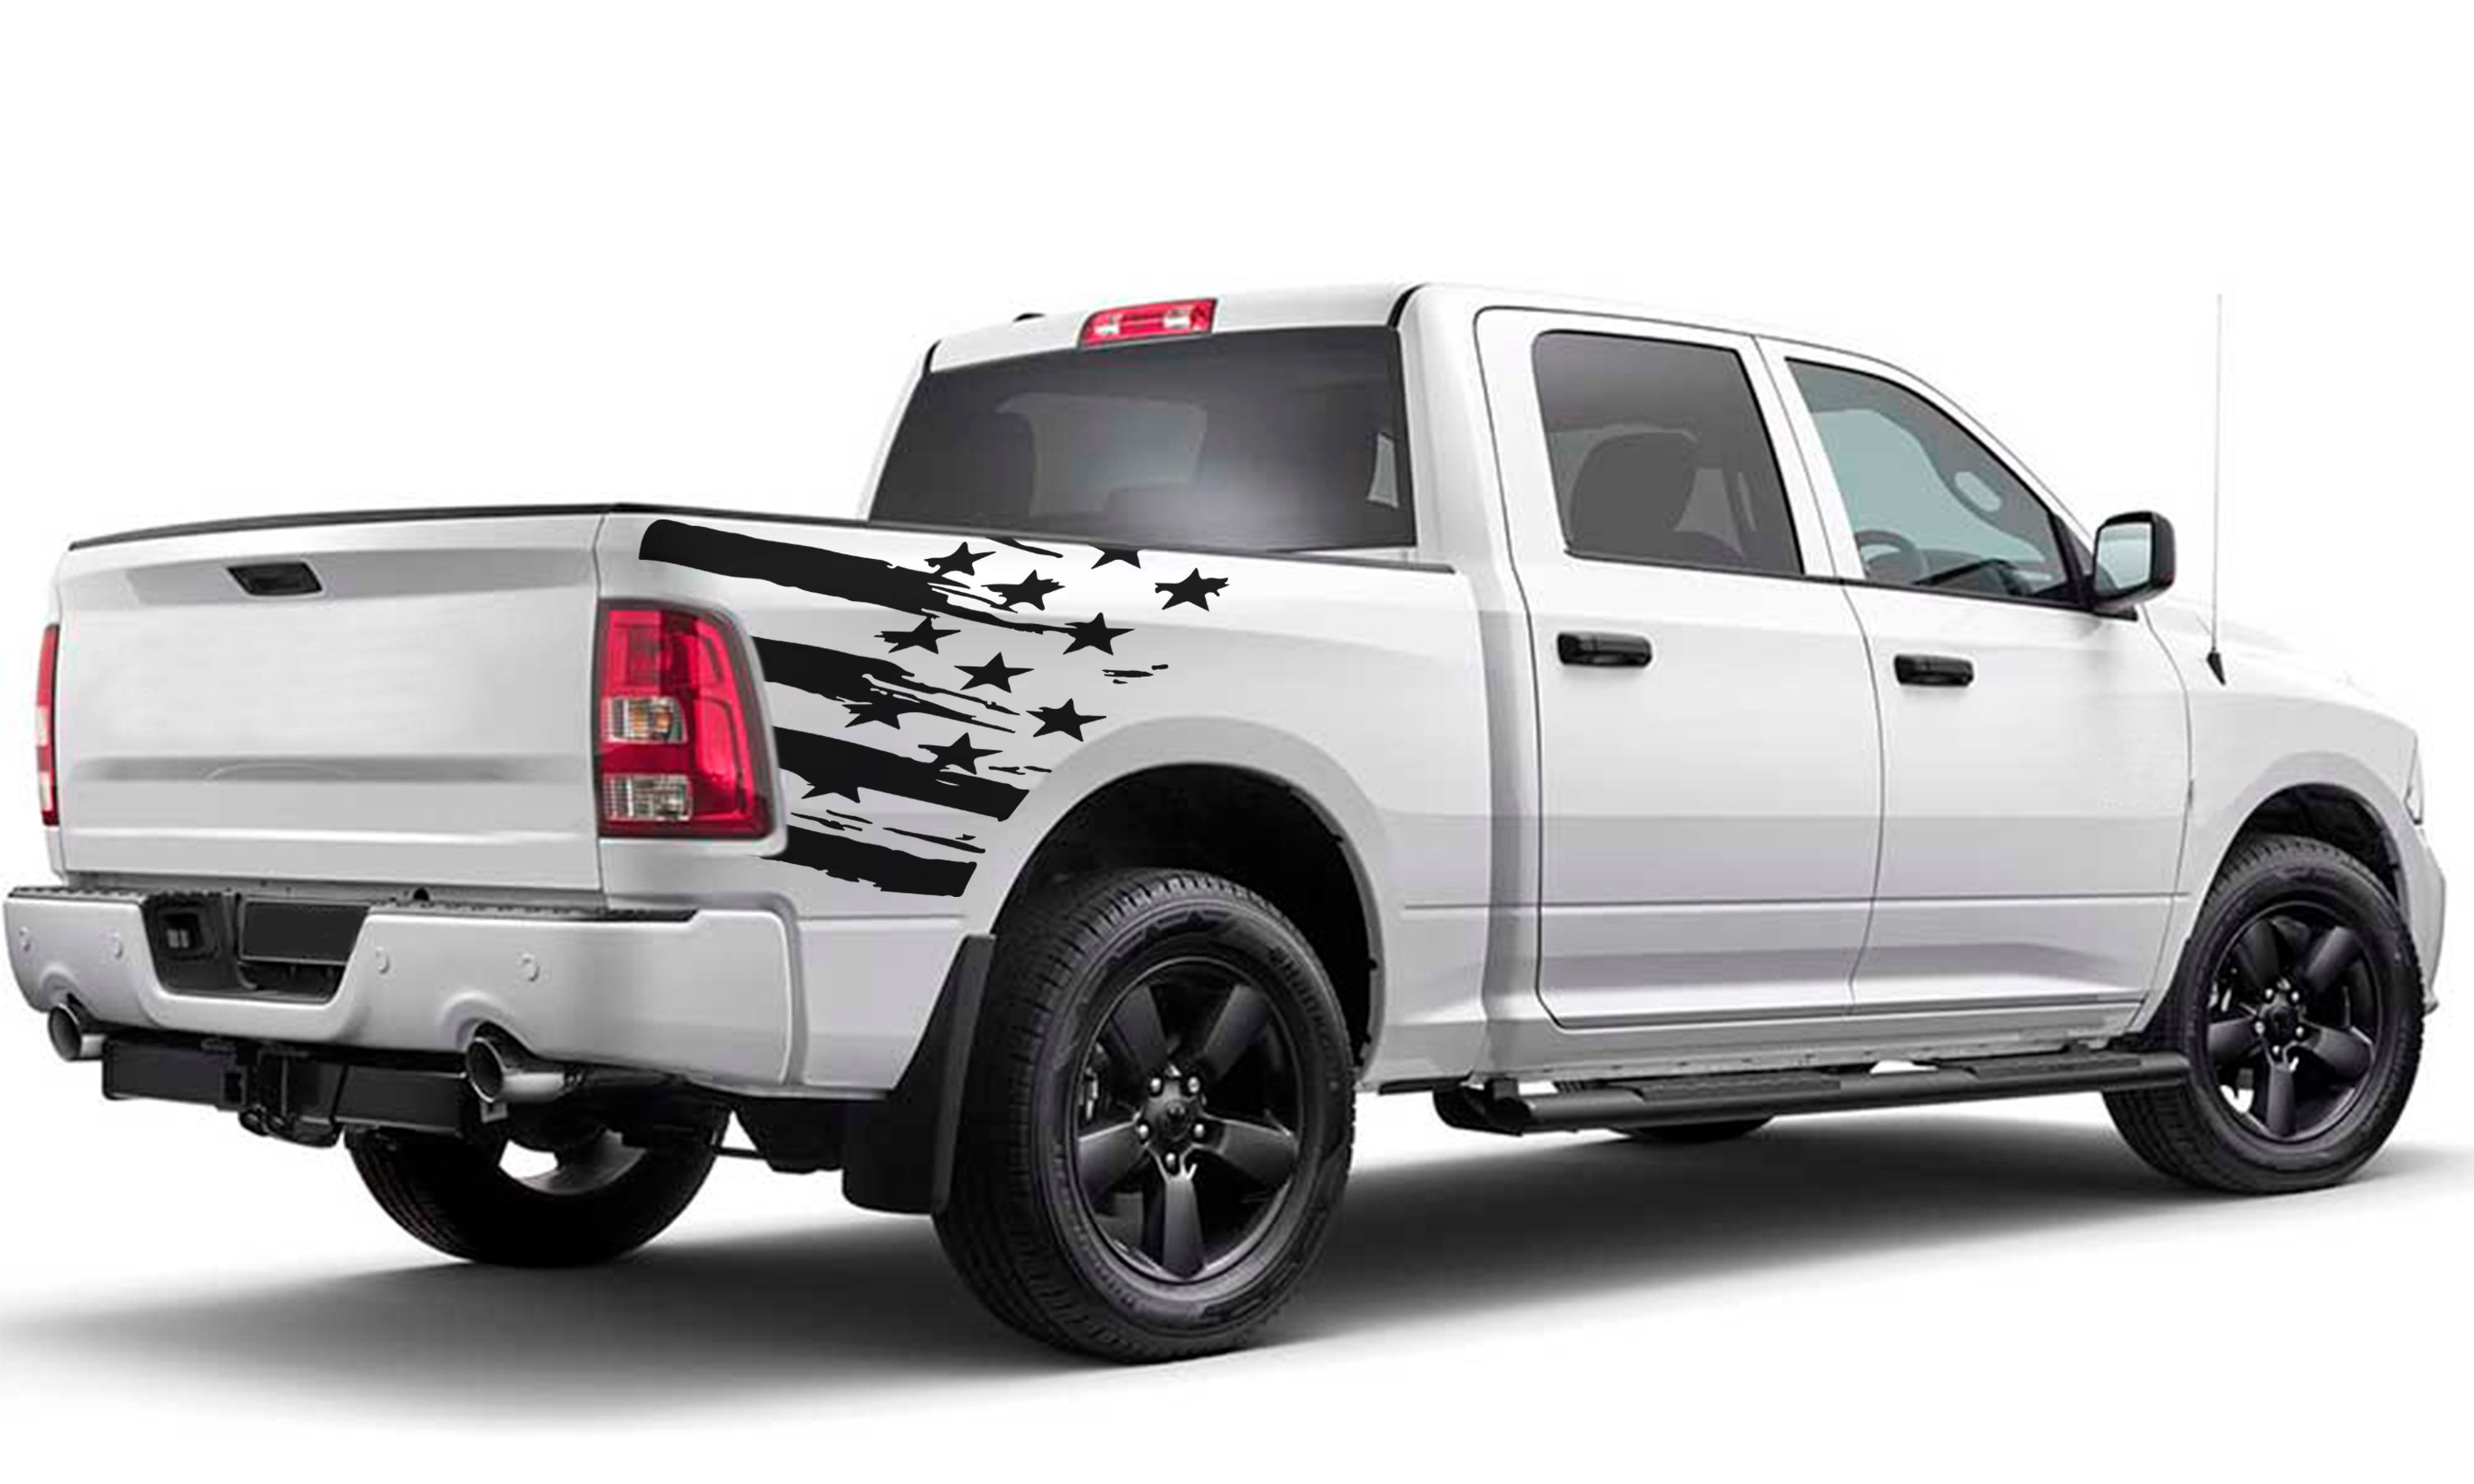 Side Bed American Decal Sticker Sport Compatible With Dodge Ram 1500 Crew Cab 2019 2020 2021 4x4 Off Road Vinyl